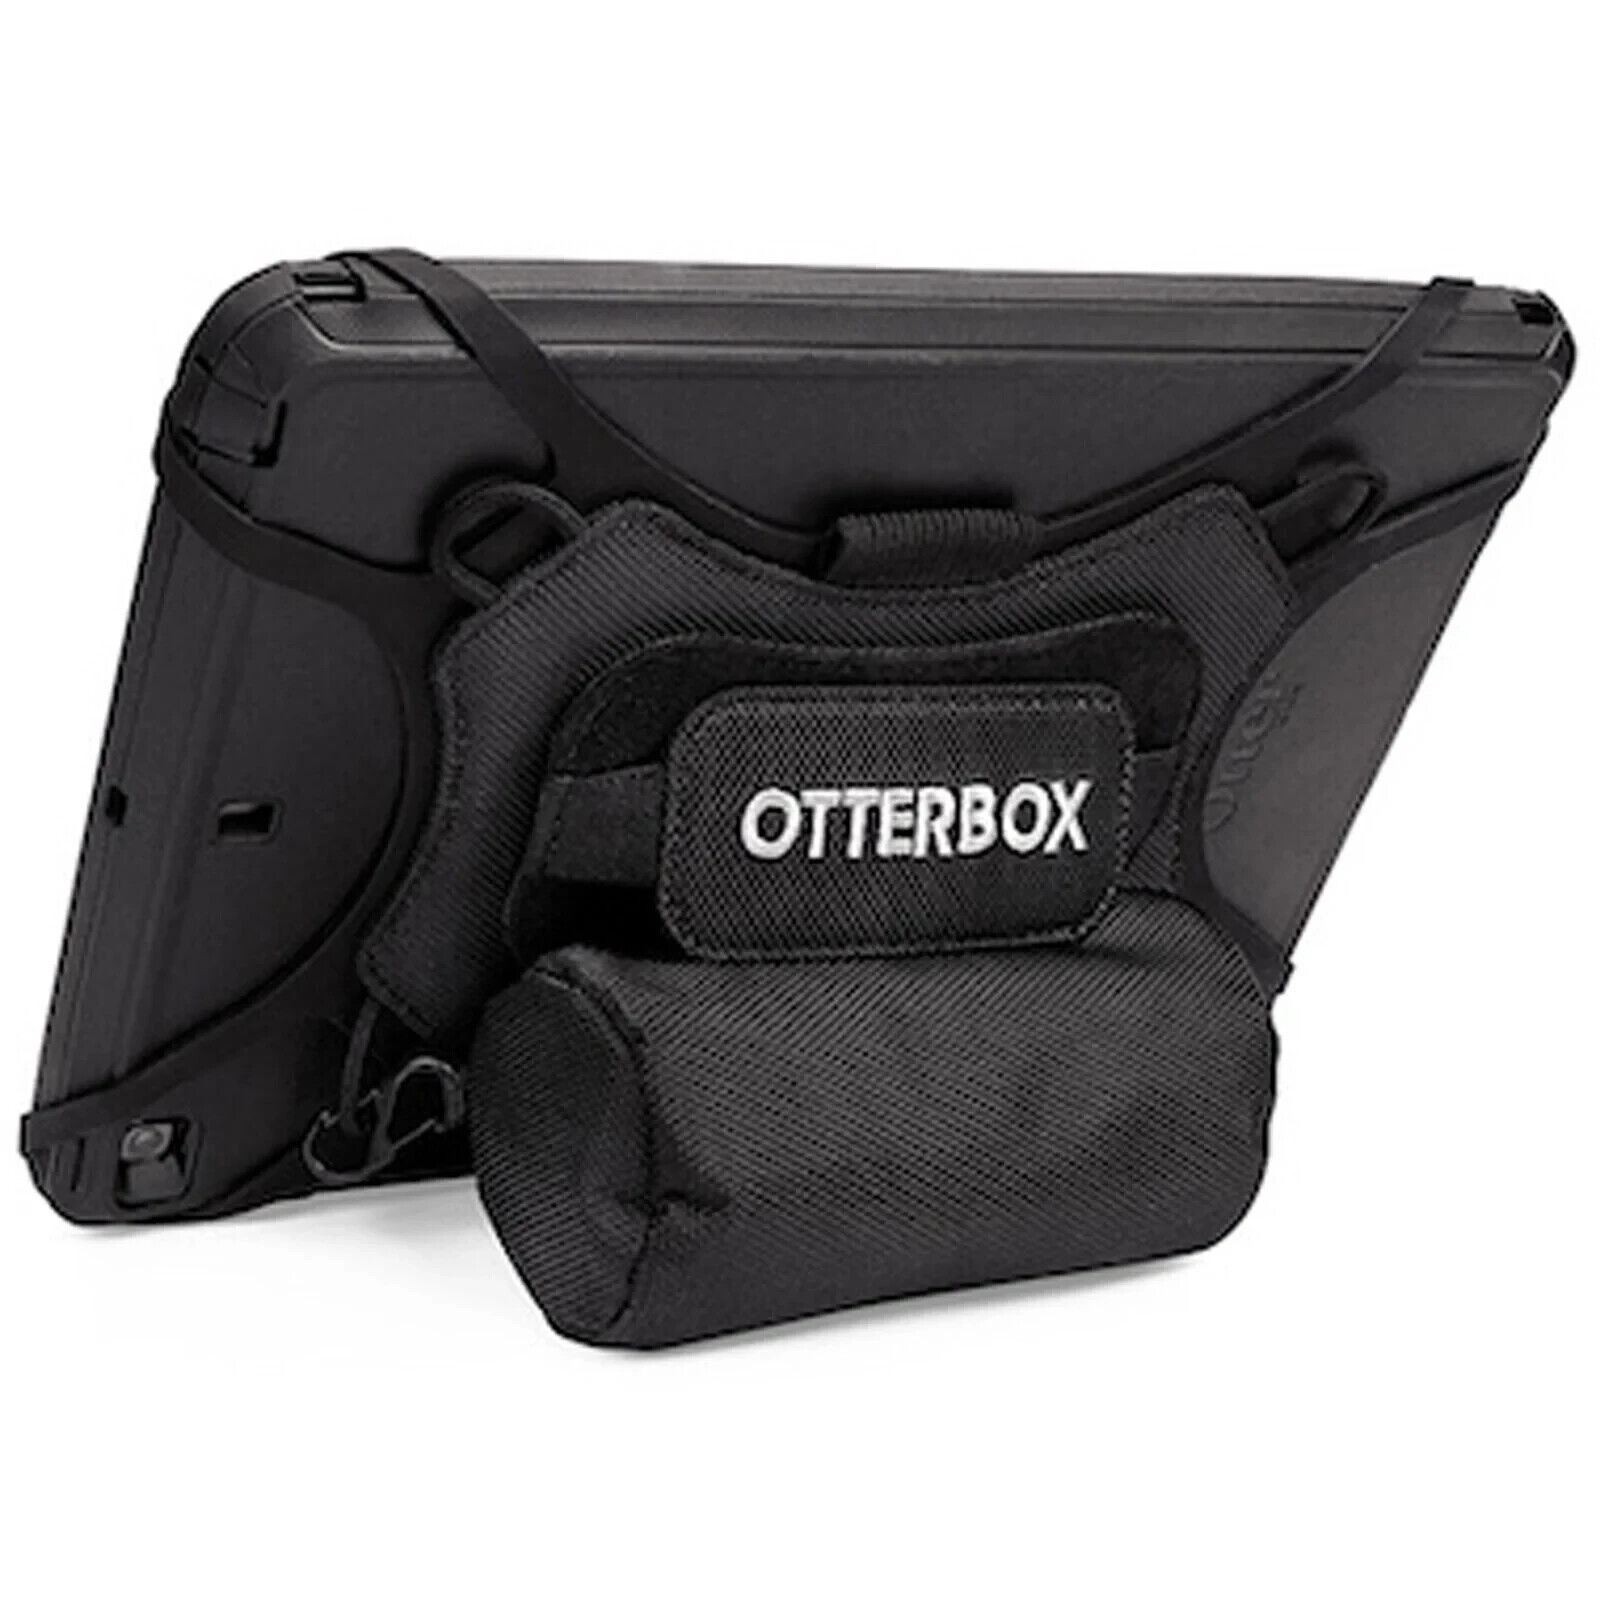 OTTERBOX Utility Series Latch Case with Accessory Bag - Black - Brand New